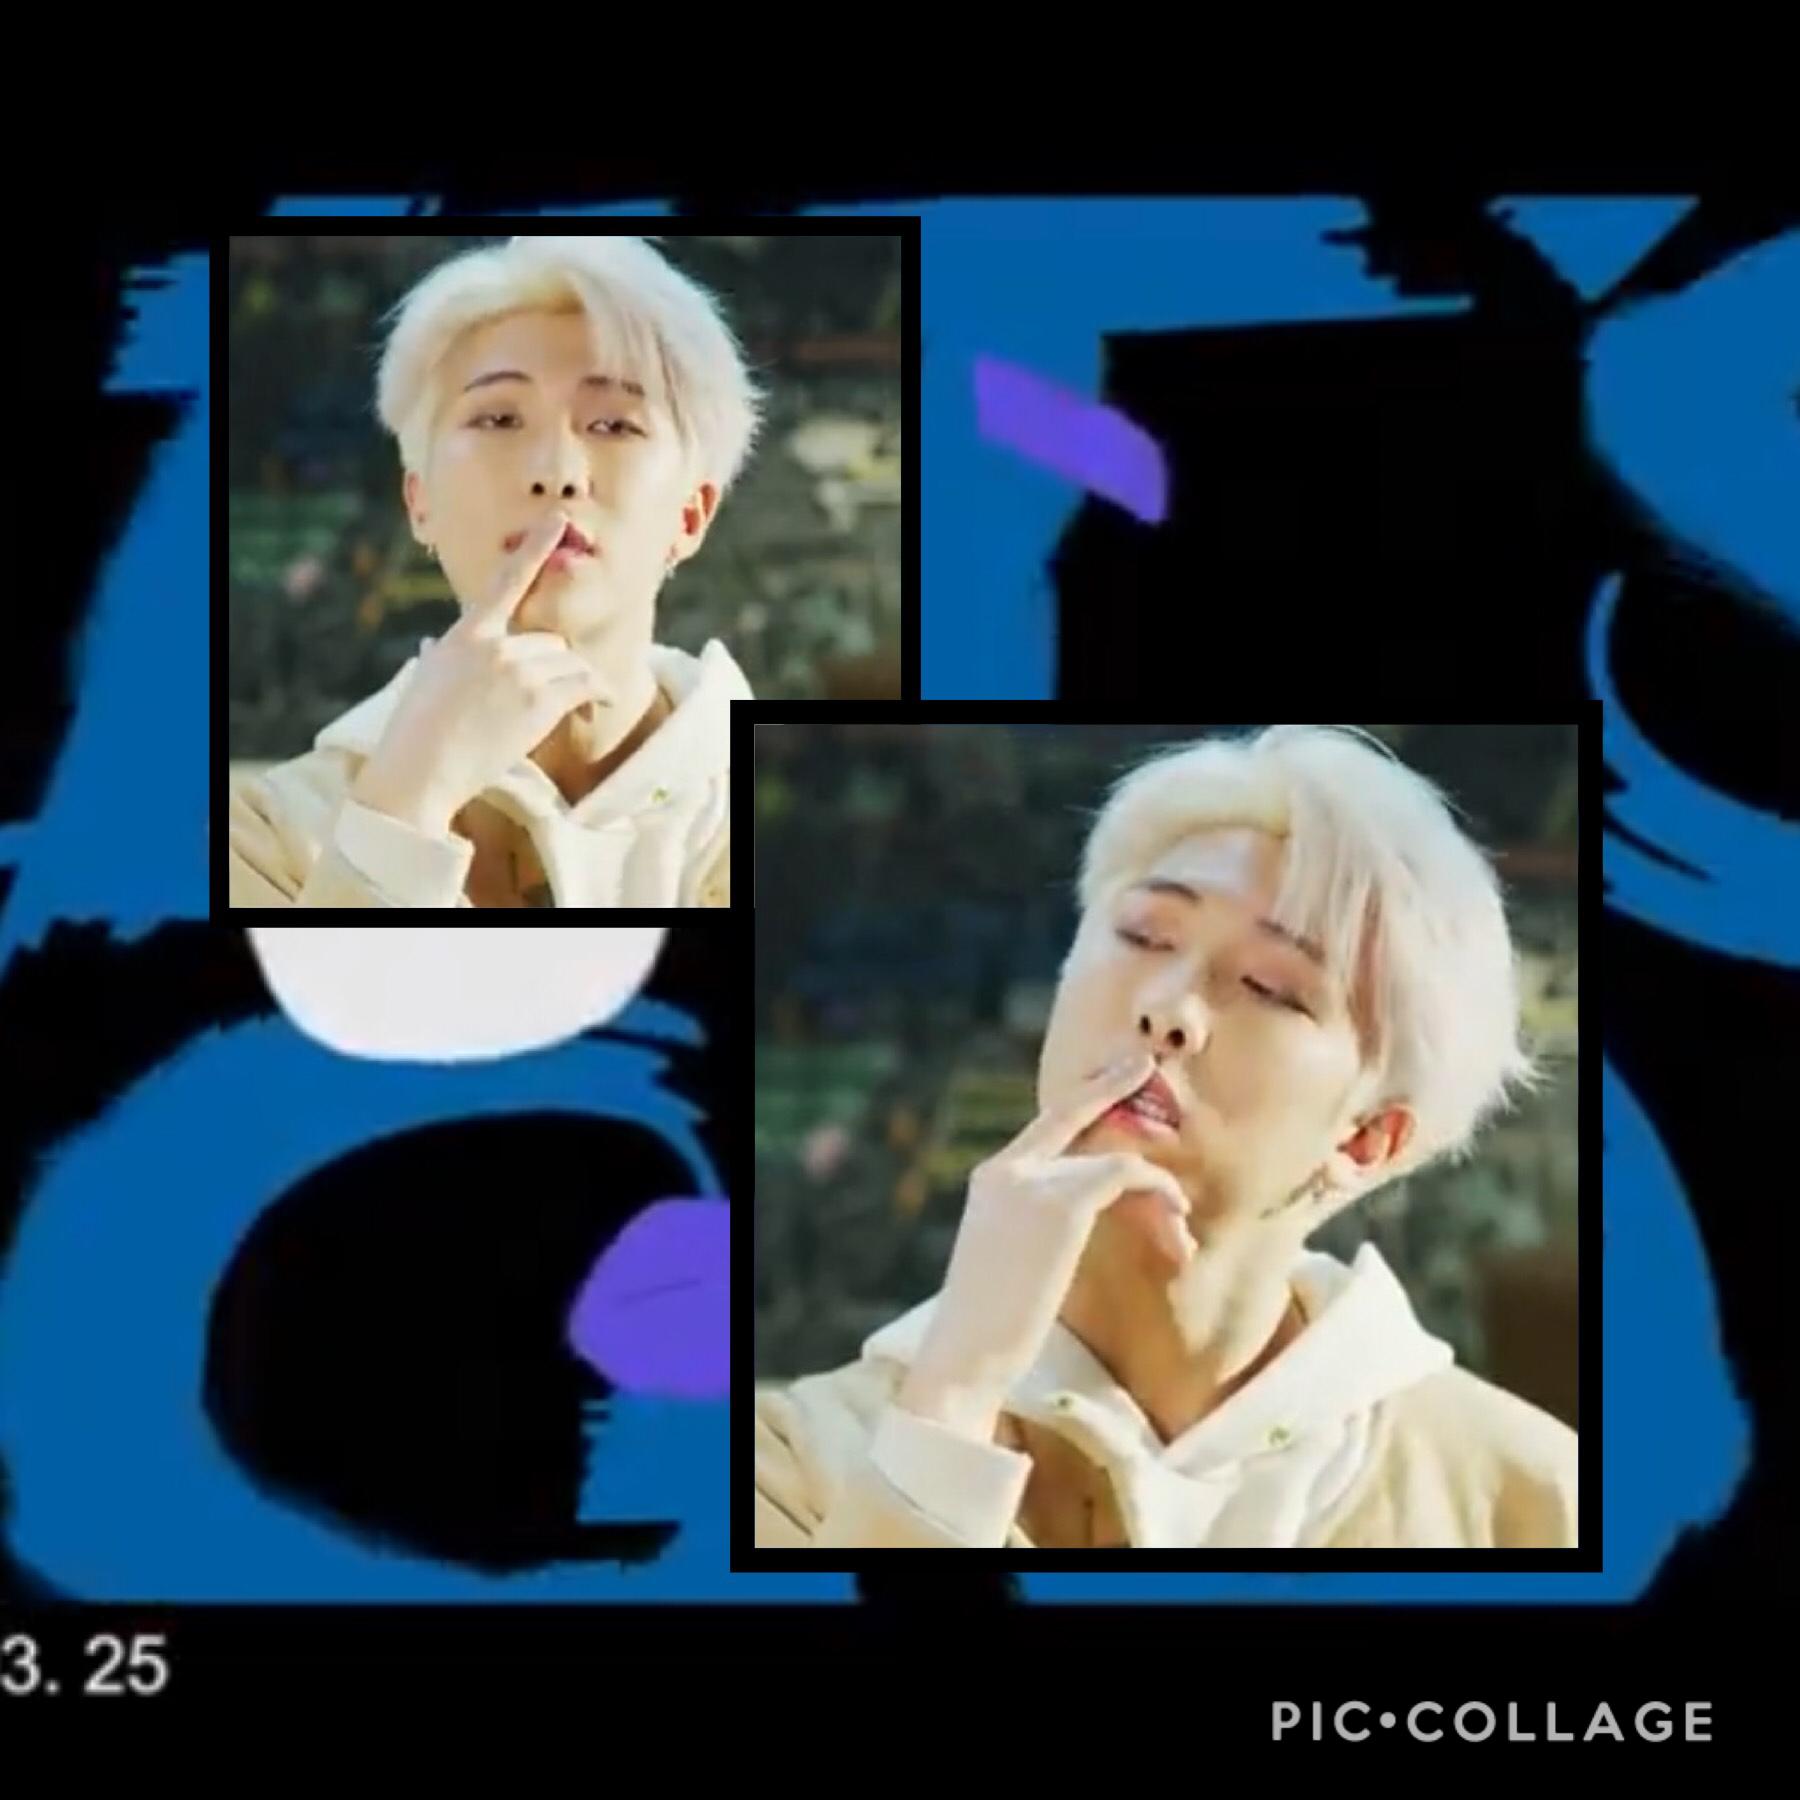 HAVE YOU SEEN THE NEW TRAILER

I AM DYING YAAAAAASSS JOON  🙌🙌 I’M SO EXCITED FOR THE ALBUM